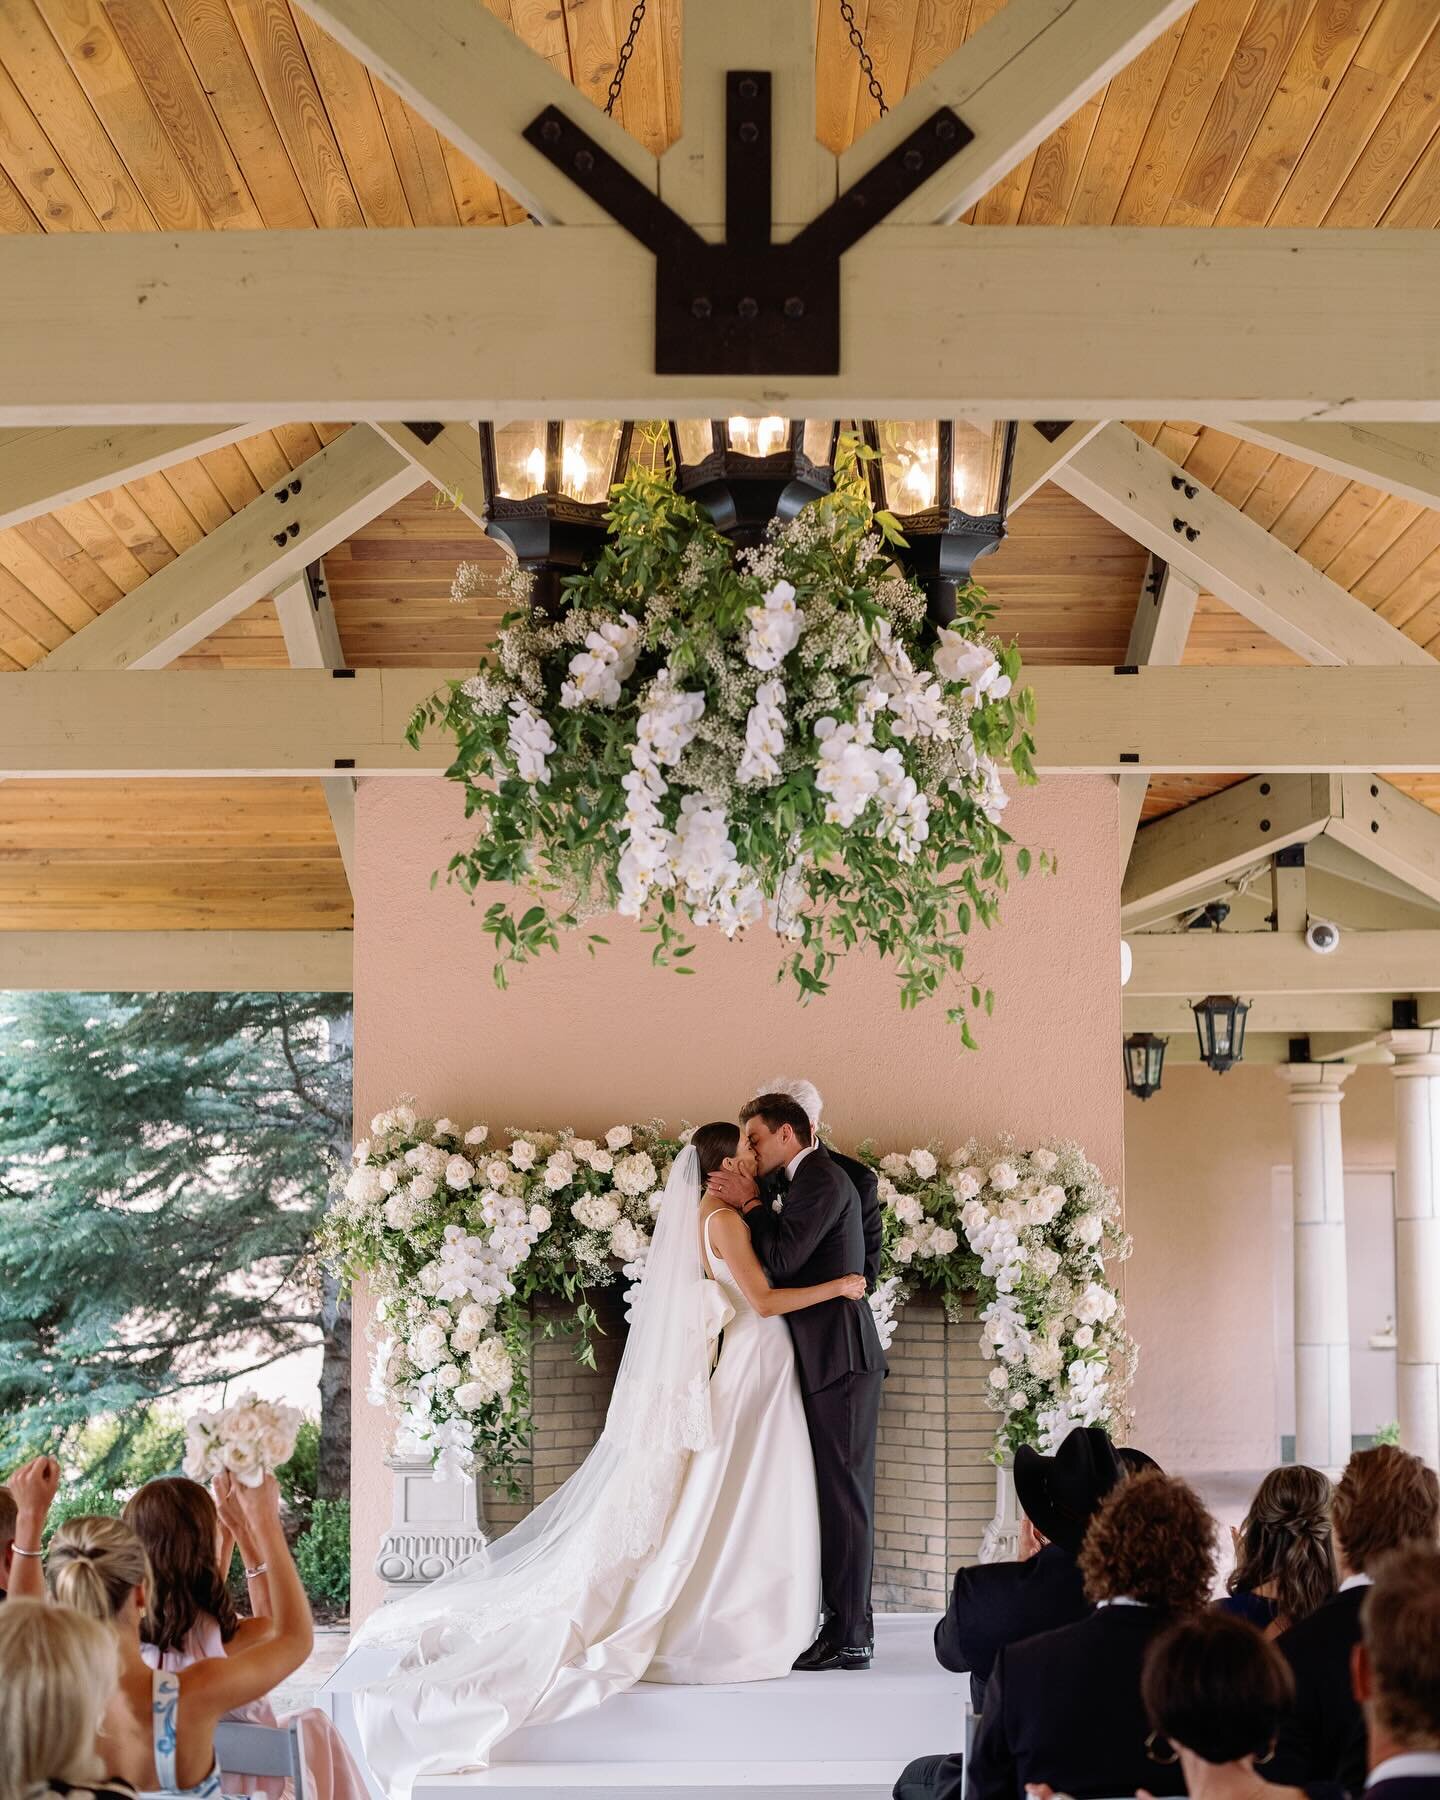 We love @thebroadmoor Mountain View Terrace for a wedding ceremony space. 

Creative Team -
Venue:&nbsp;@thebroadmoor 
Planner: @graceandgatherevents 
Photography:&nbsp;@brettheidebrecht 
Floral: Layers of Lovely&nbsp;
Hair &amp; Makeup:&nbsp;@divine